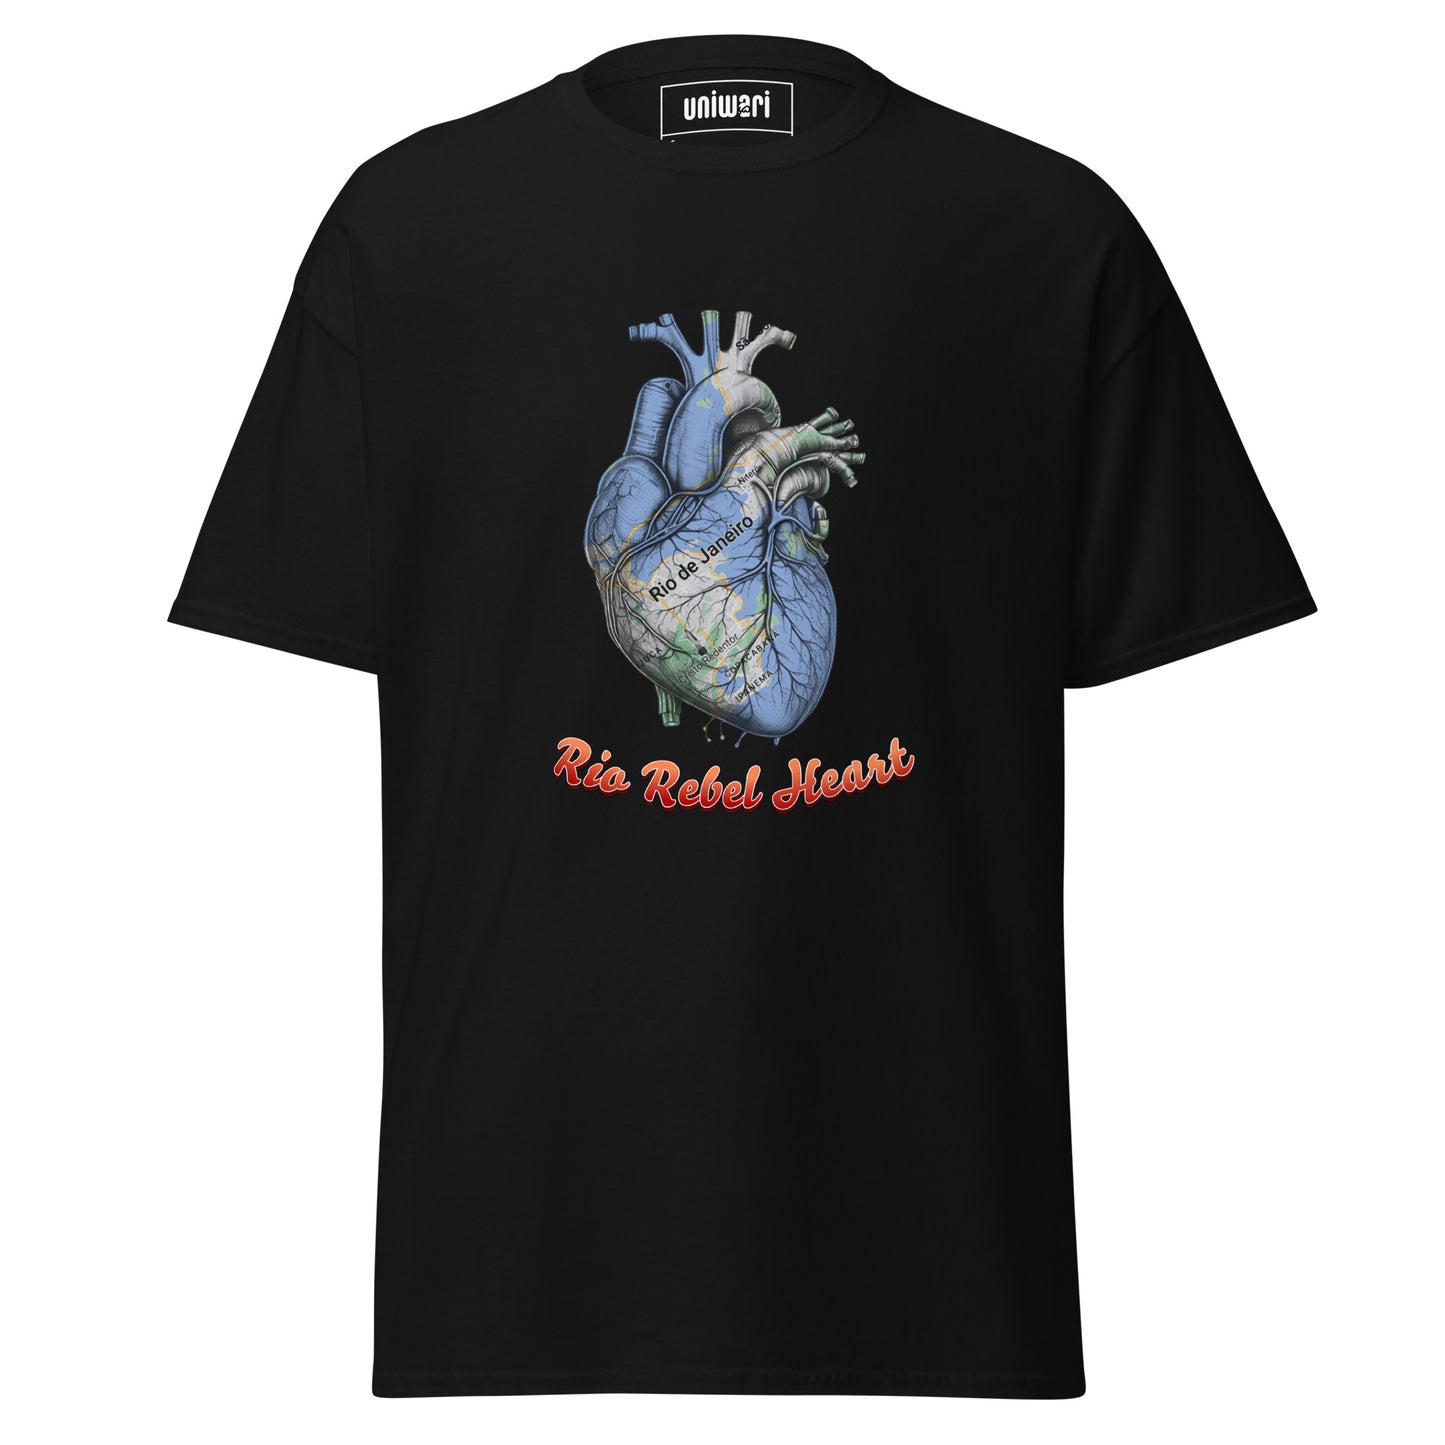 Black High Quality Tee - Front Design with a Heart Shaped Map of Rio de Janeiro and a Phrase "Rio Rebel Heart" print